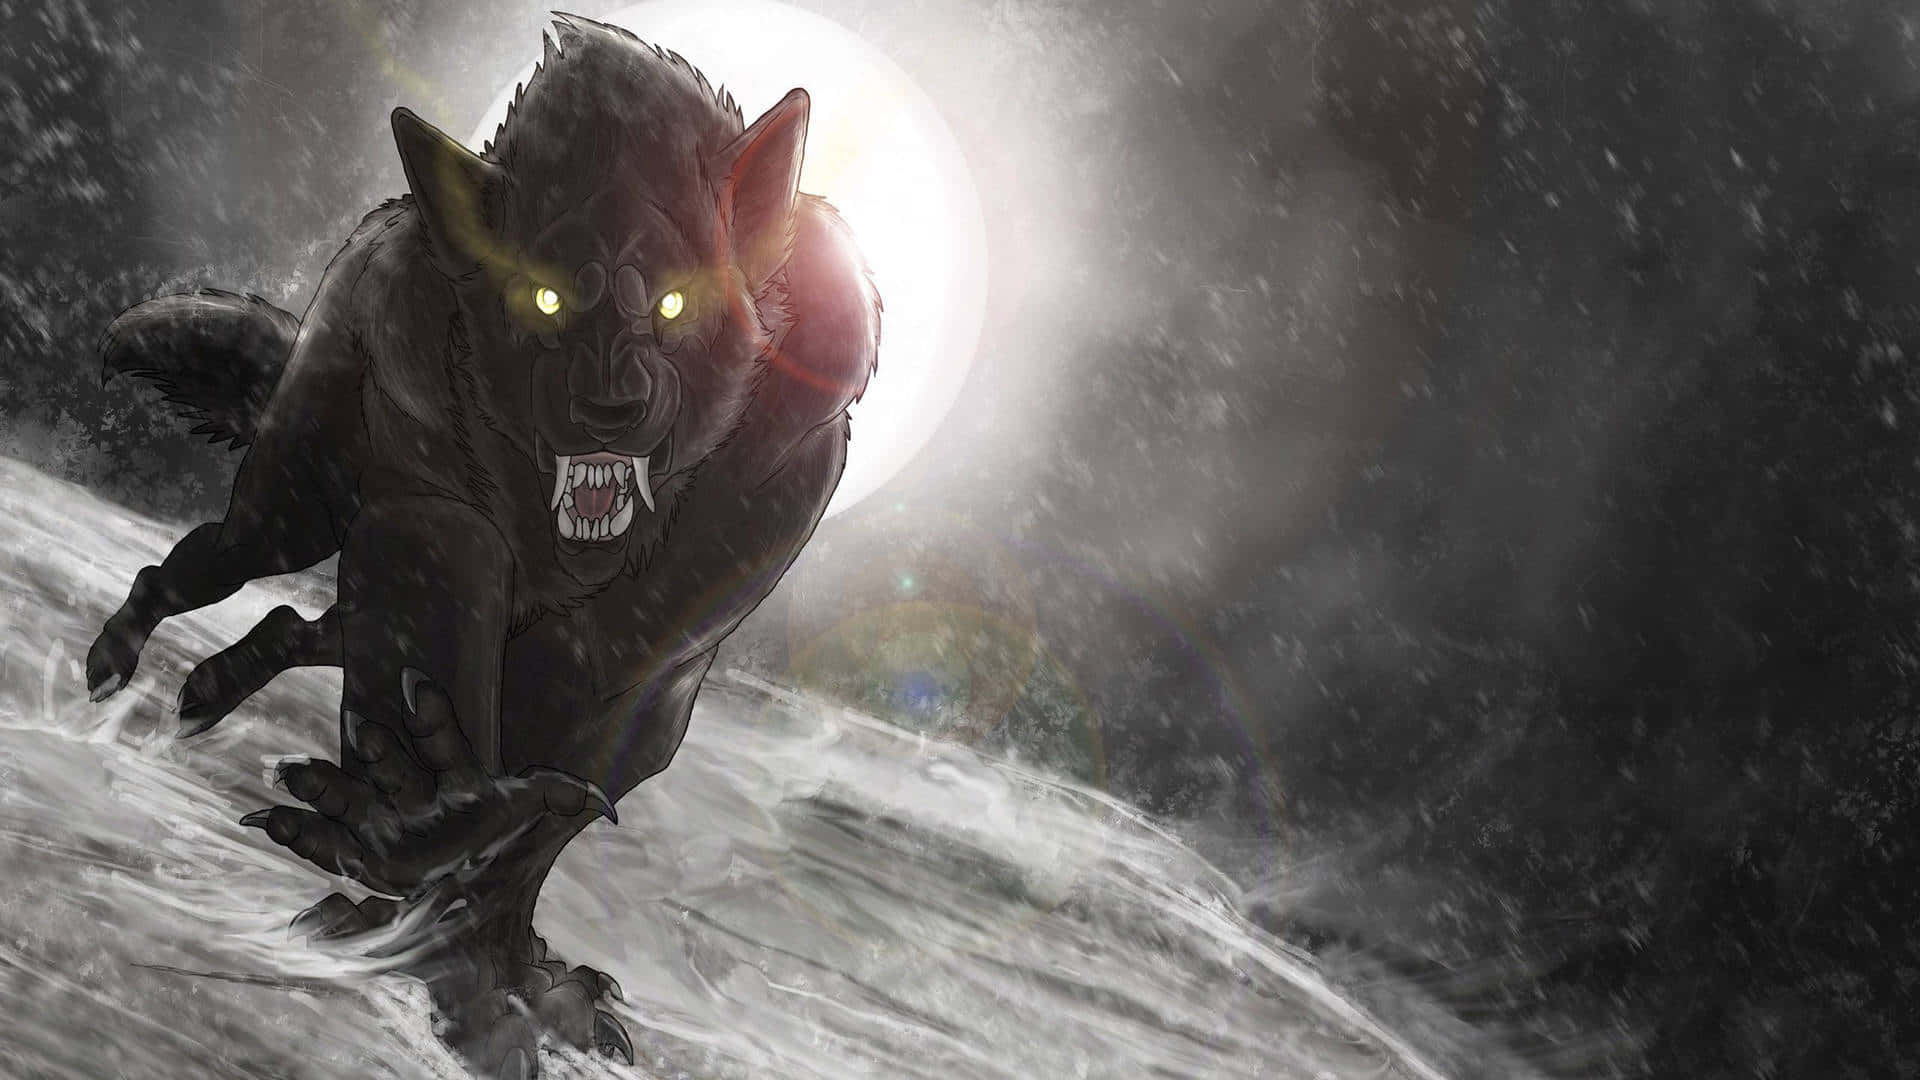 Vicious Wolf Attack in the Wilderness Wallpaper